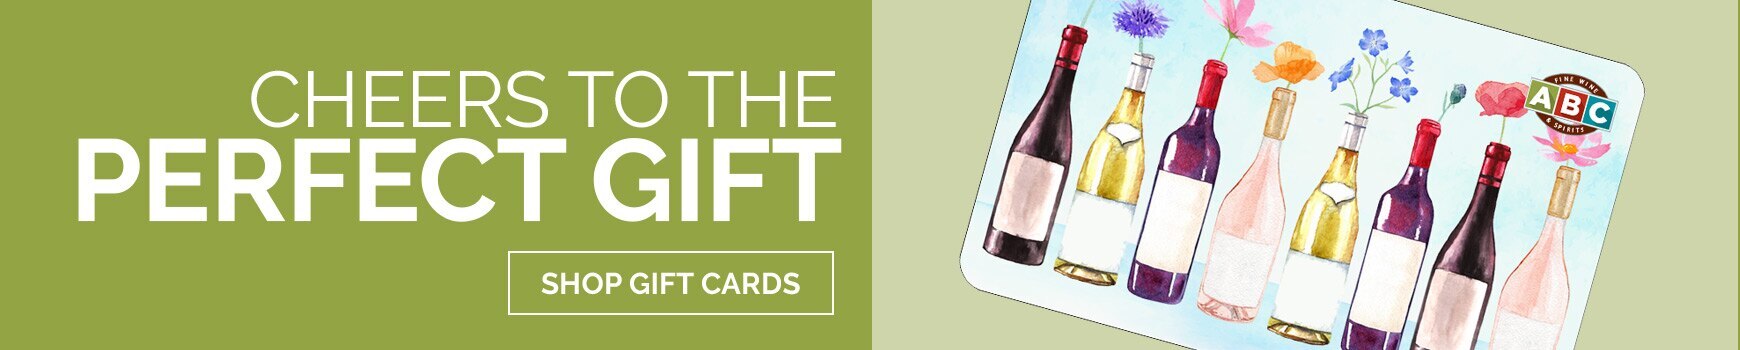 Gift Cards for All Occasions